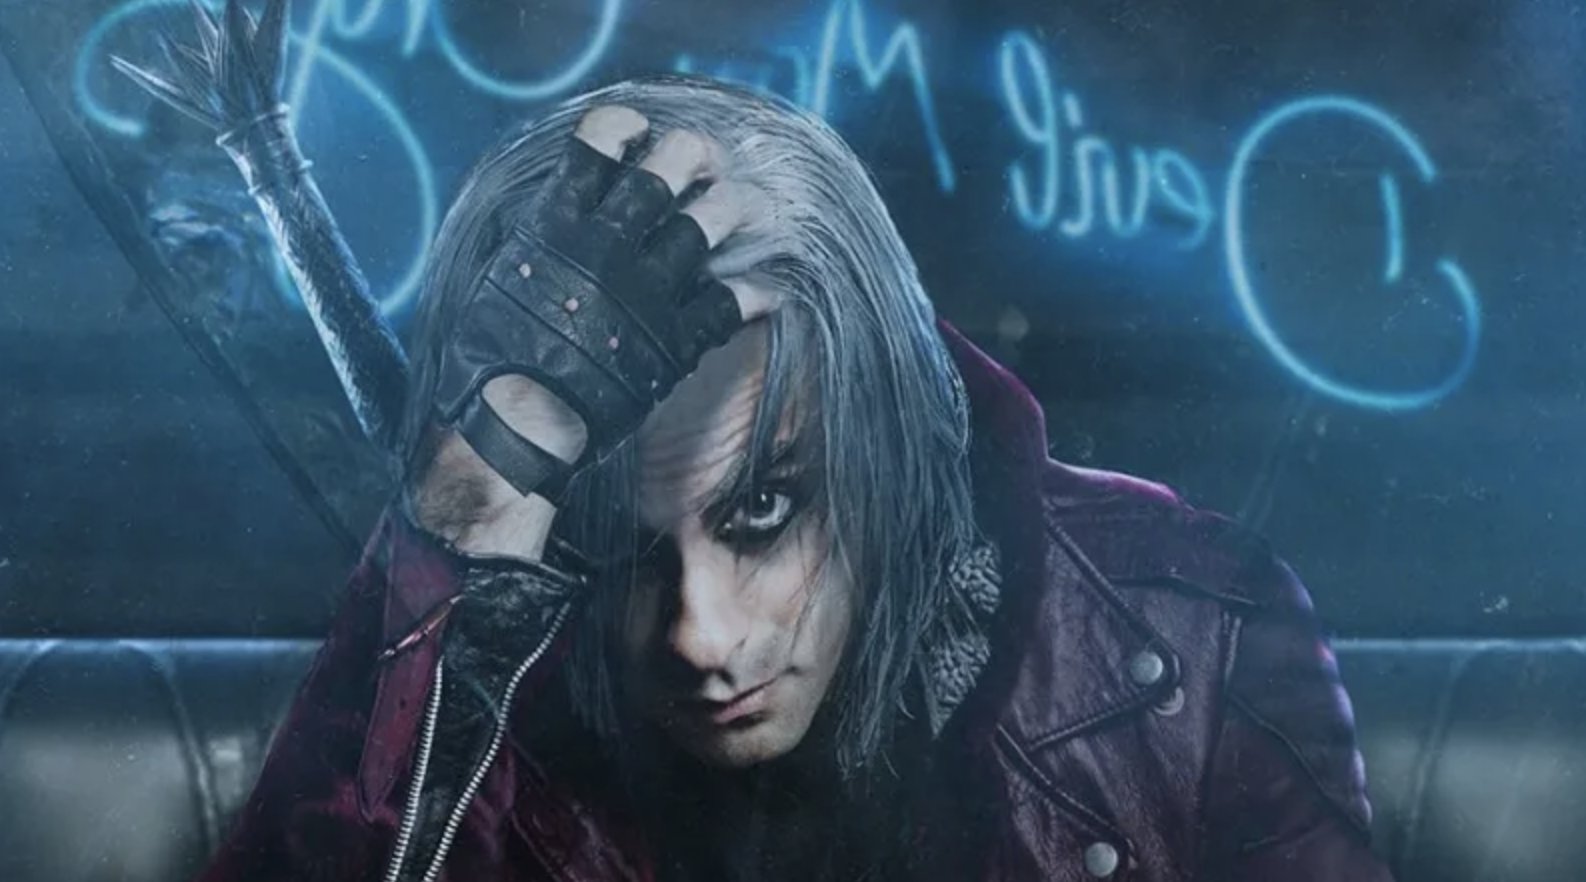 Netflix's First Devil May Cry Anime Teaser Is Making Twitter Explode